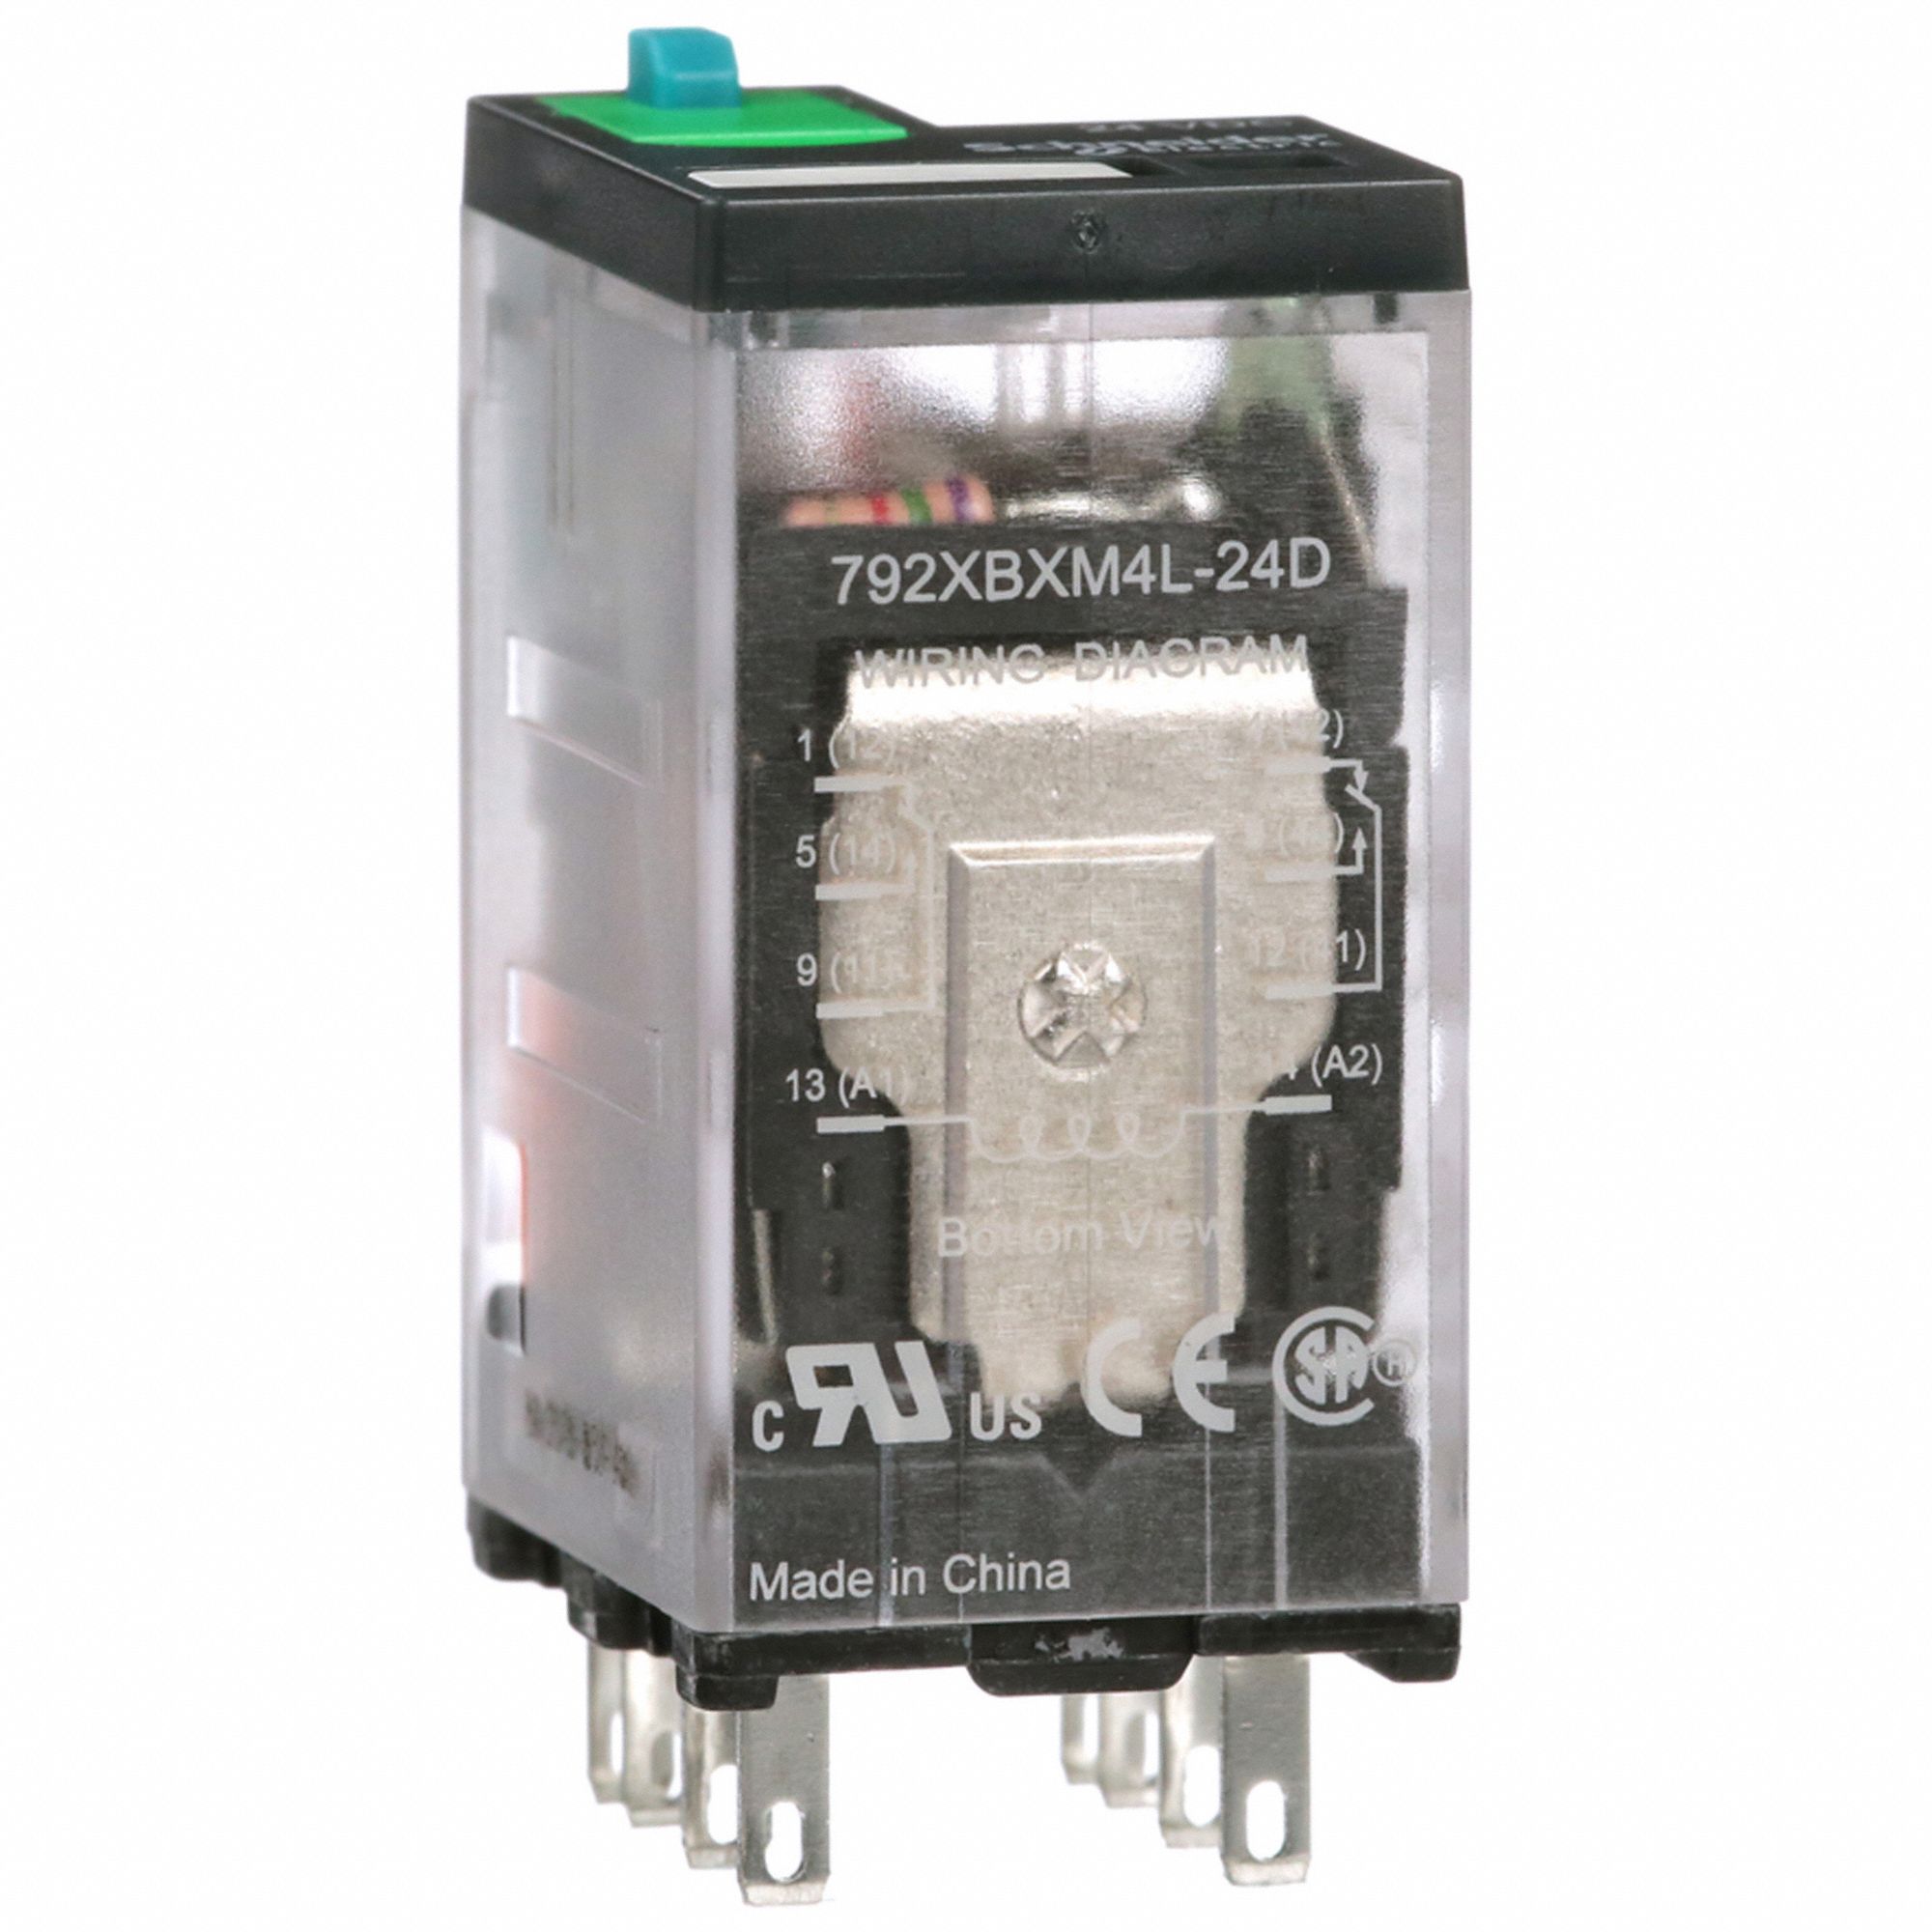 SCHNEIDER General Purpose Relay: Socket Mounted, 12 A Current Rating, 24V  DC, 8 Pins/Terminals, DPDT